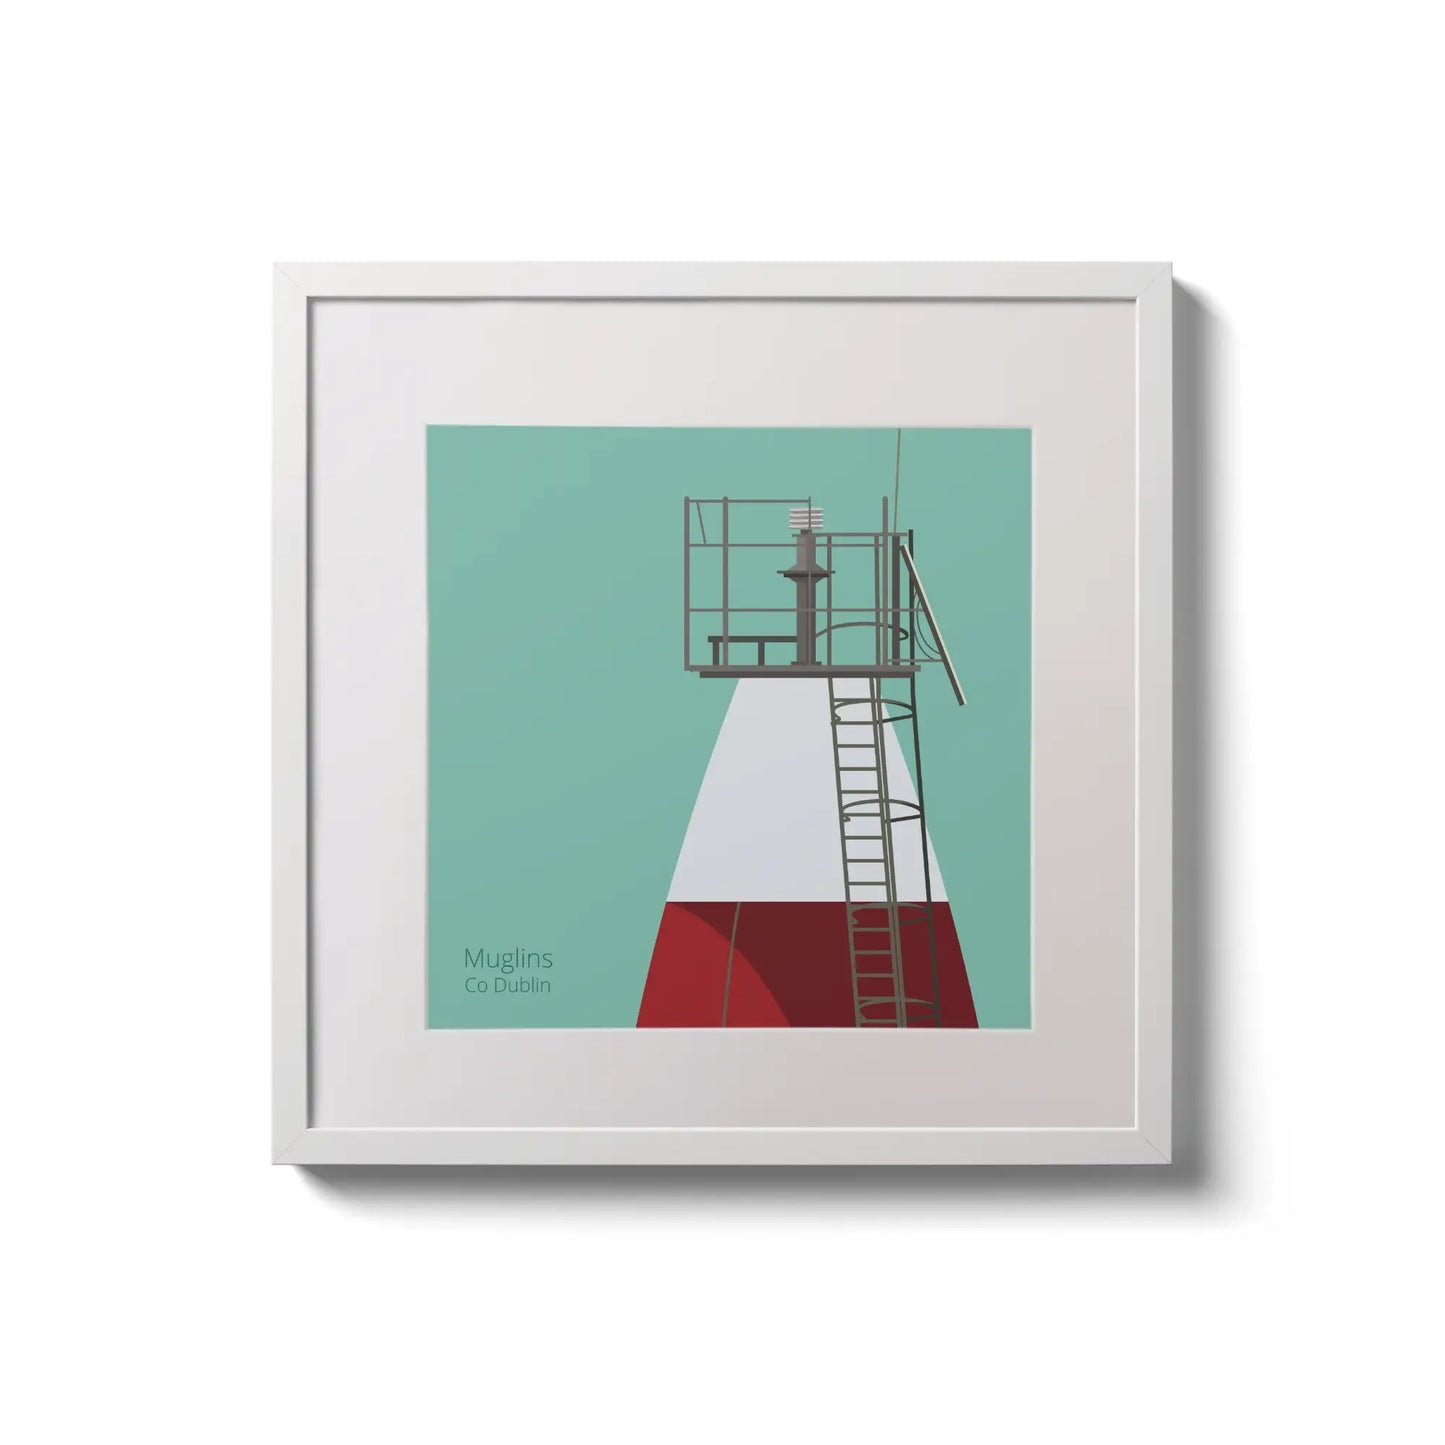 Contemporary wall hanging Muglins lighthouse on an ocean green background,  in a white square frame measuring 20x20cm.